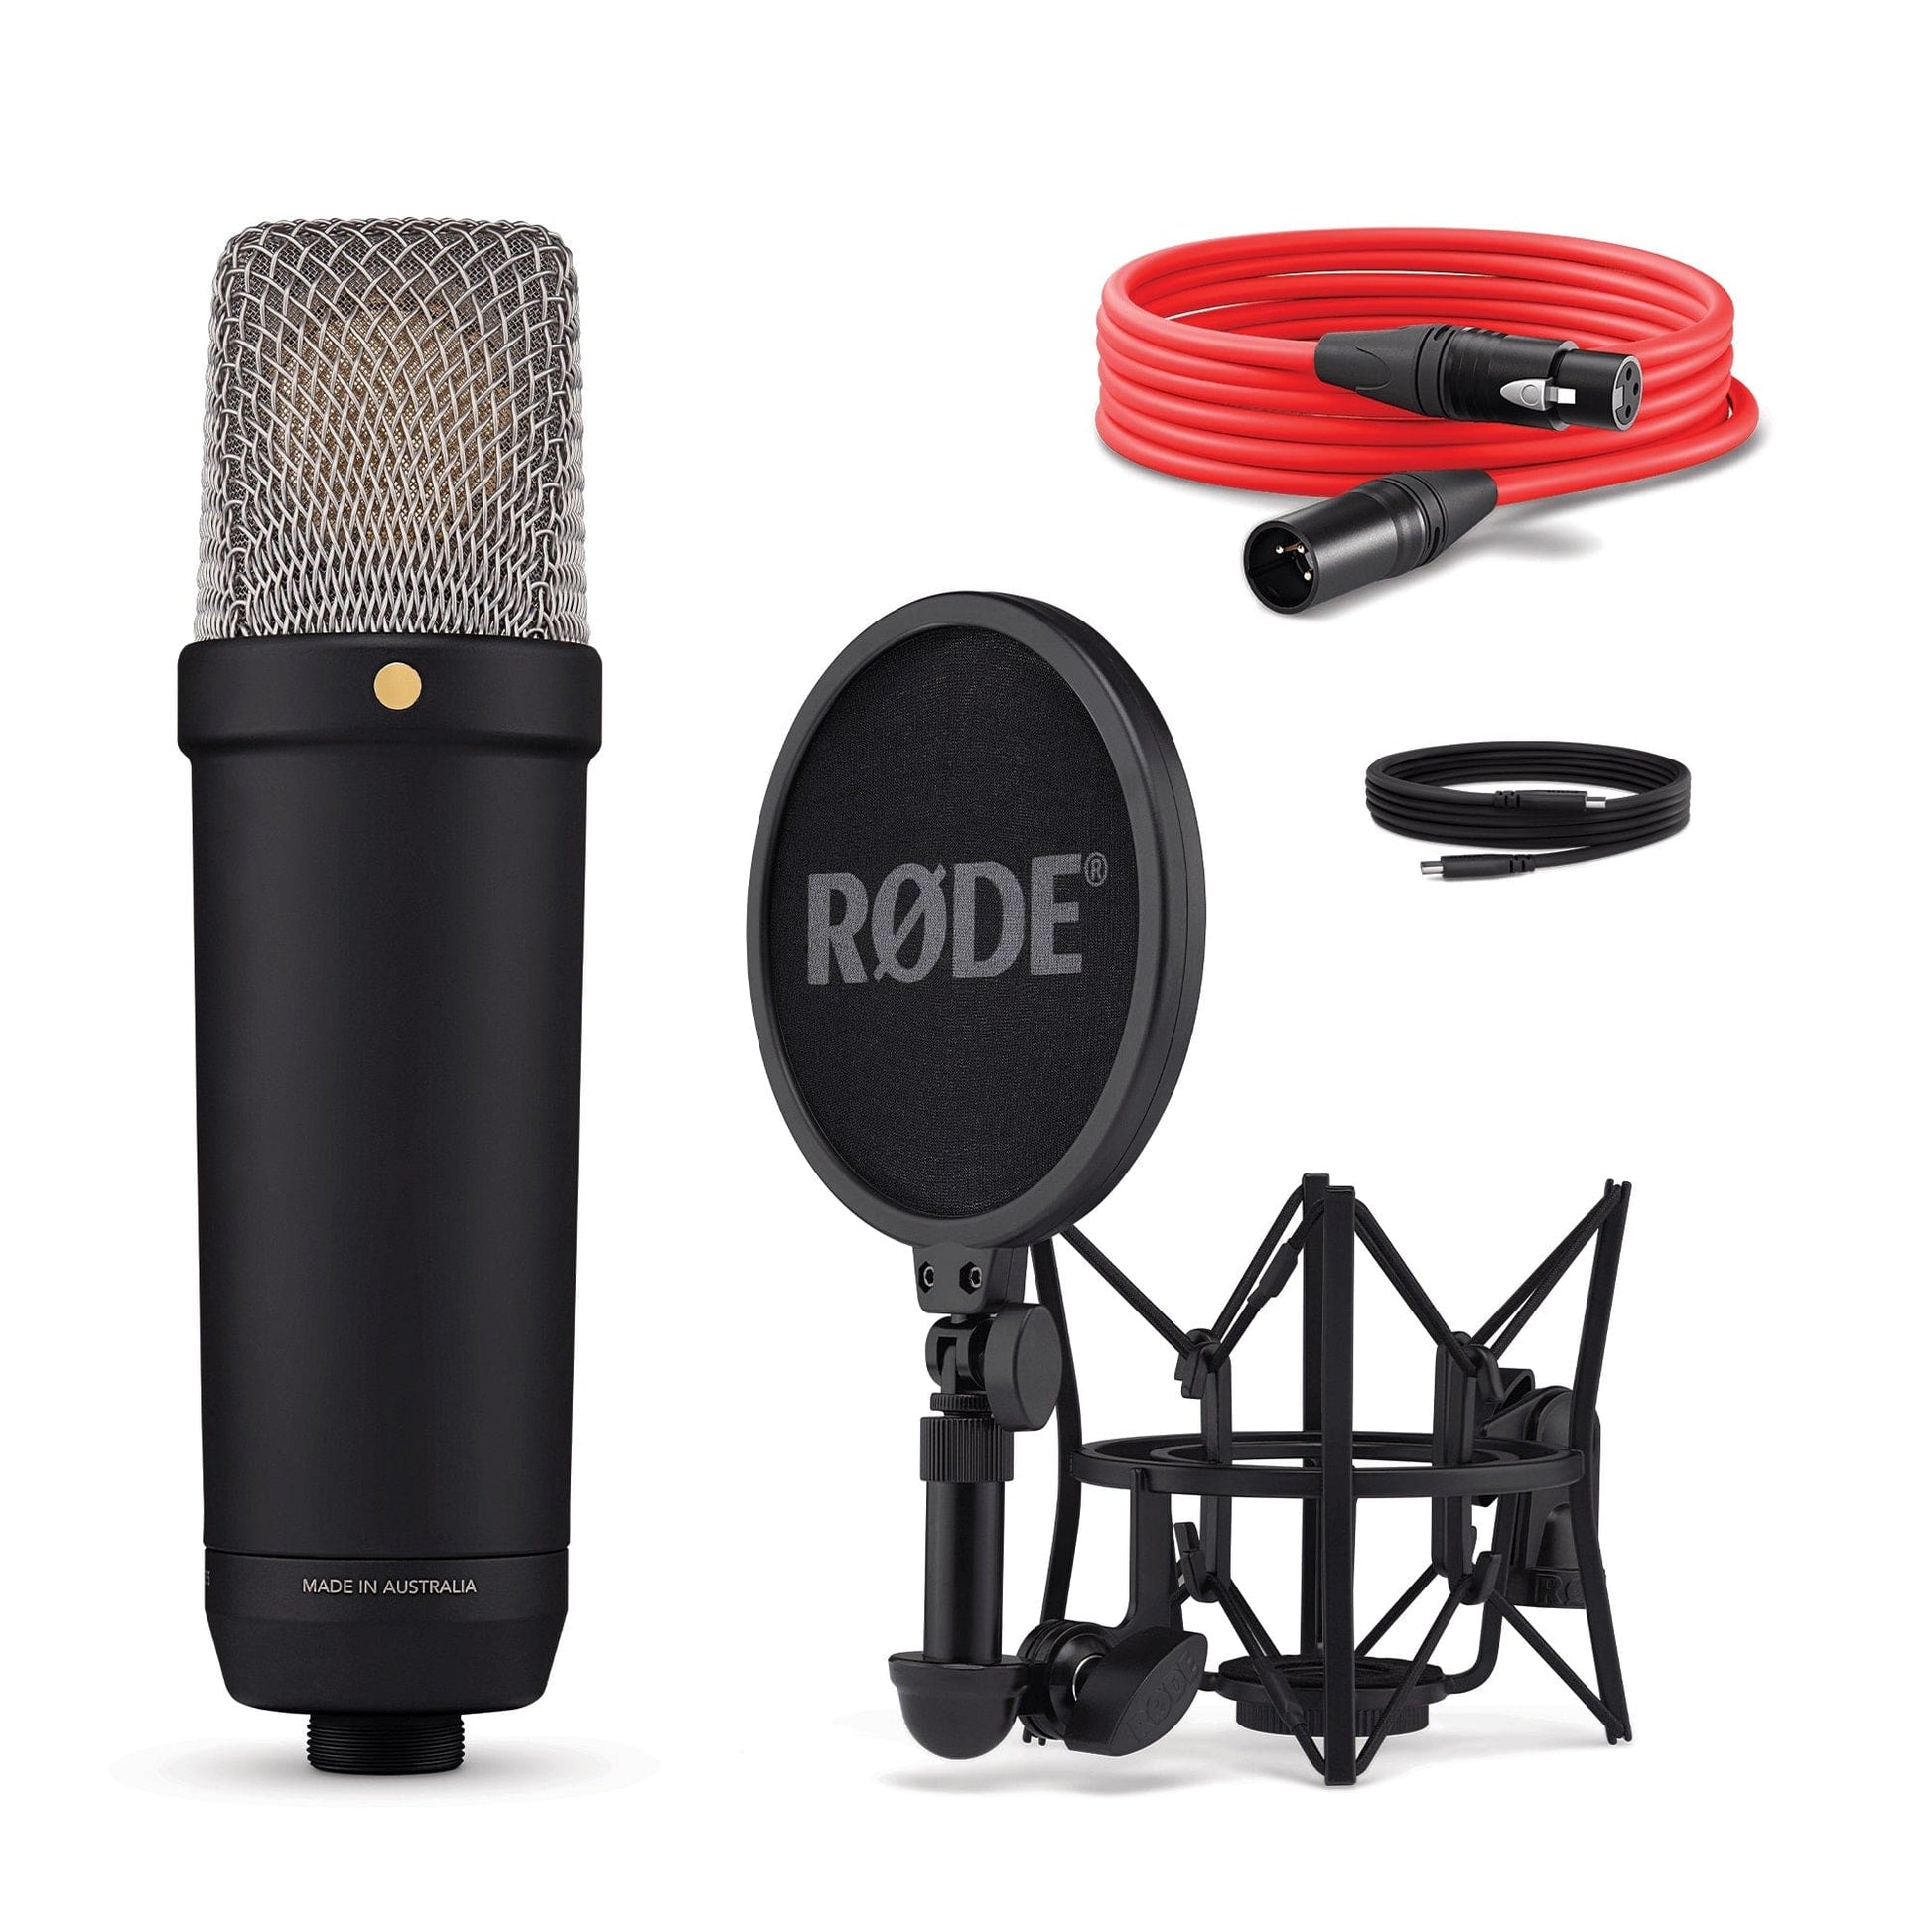 Rode NT1-A - The World's Quietest Studio Condenser Microphone